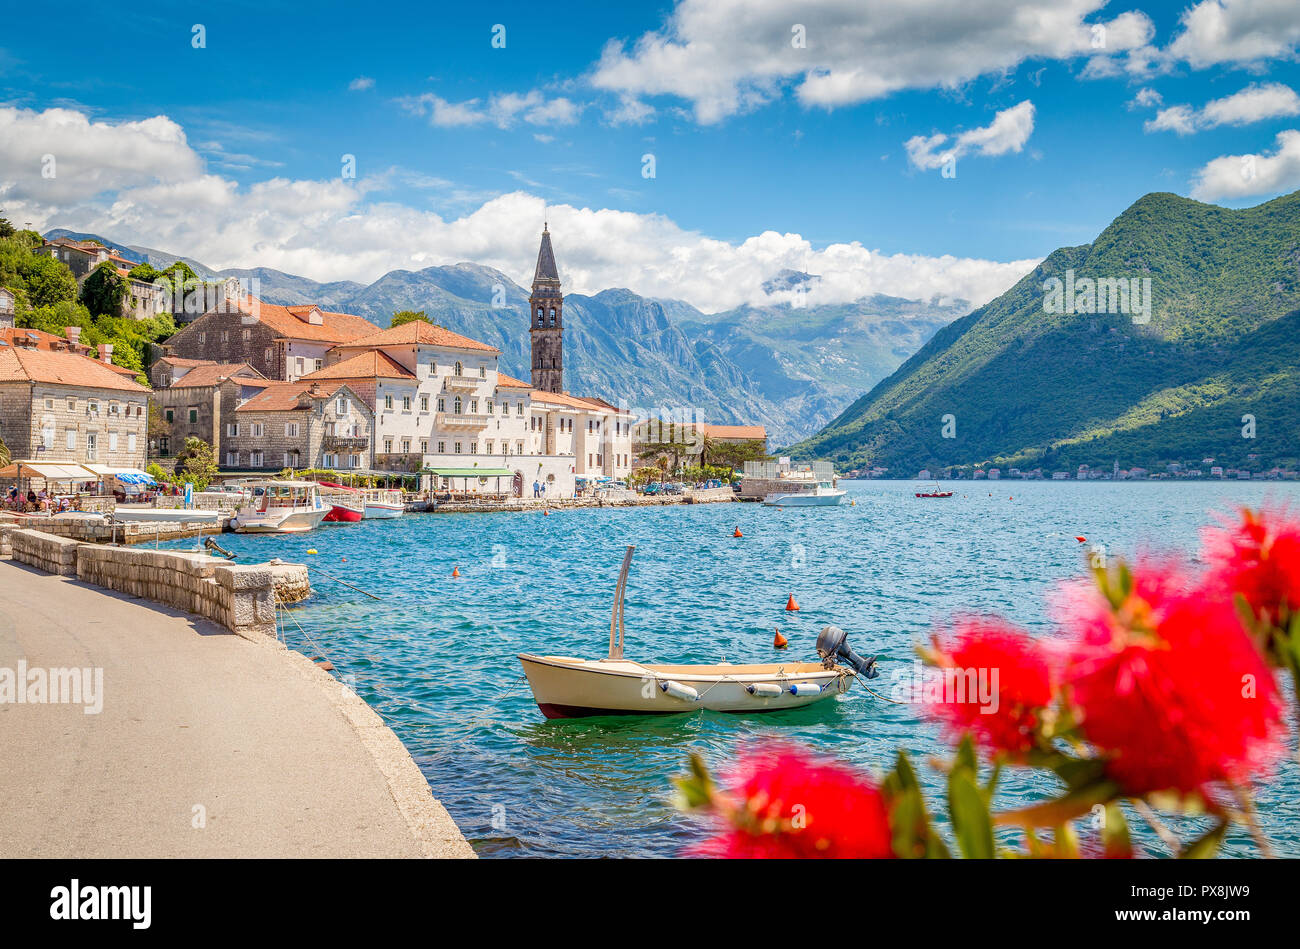 Scenic panorama view of the historic town of Perast at famous Bay of Kotor with blooming flowers on a beautiful sunny day with blue sky and clouds in  Stock Photo